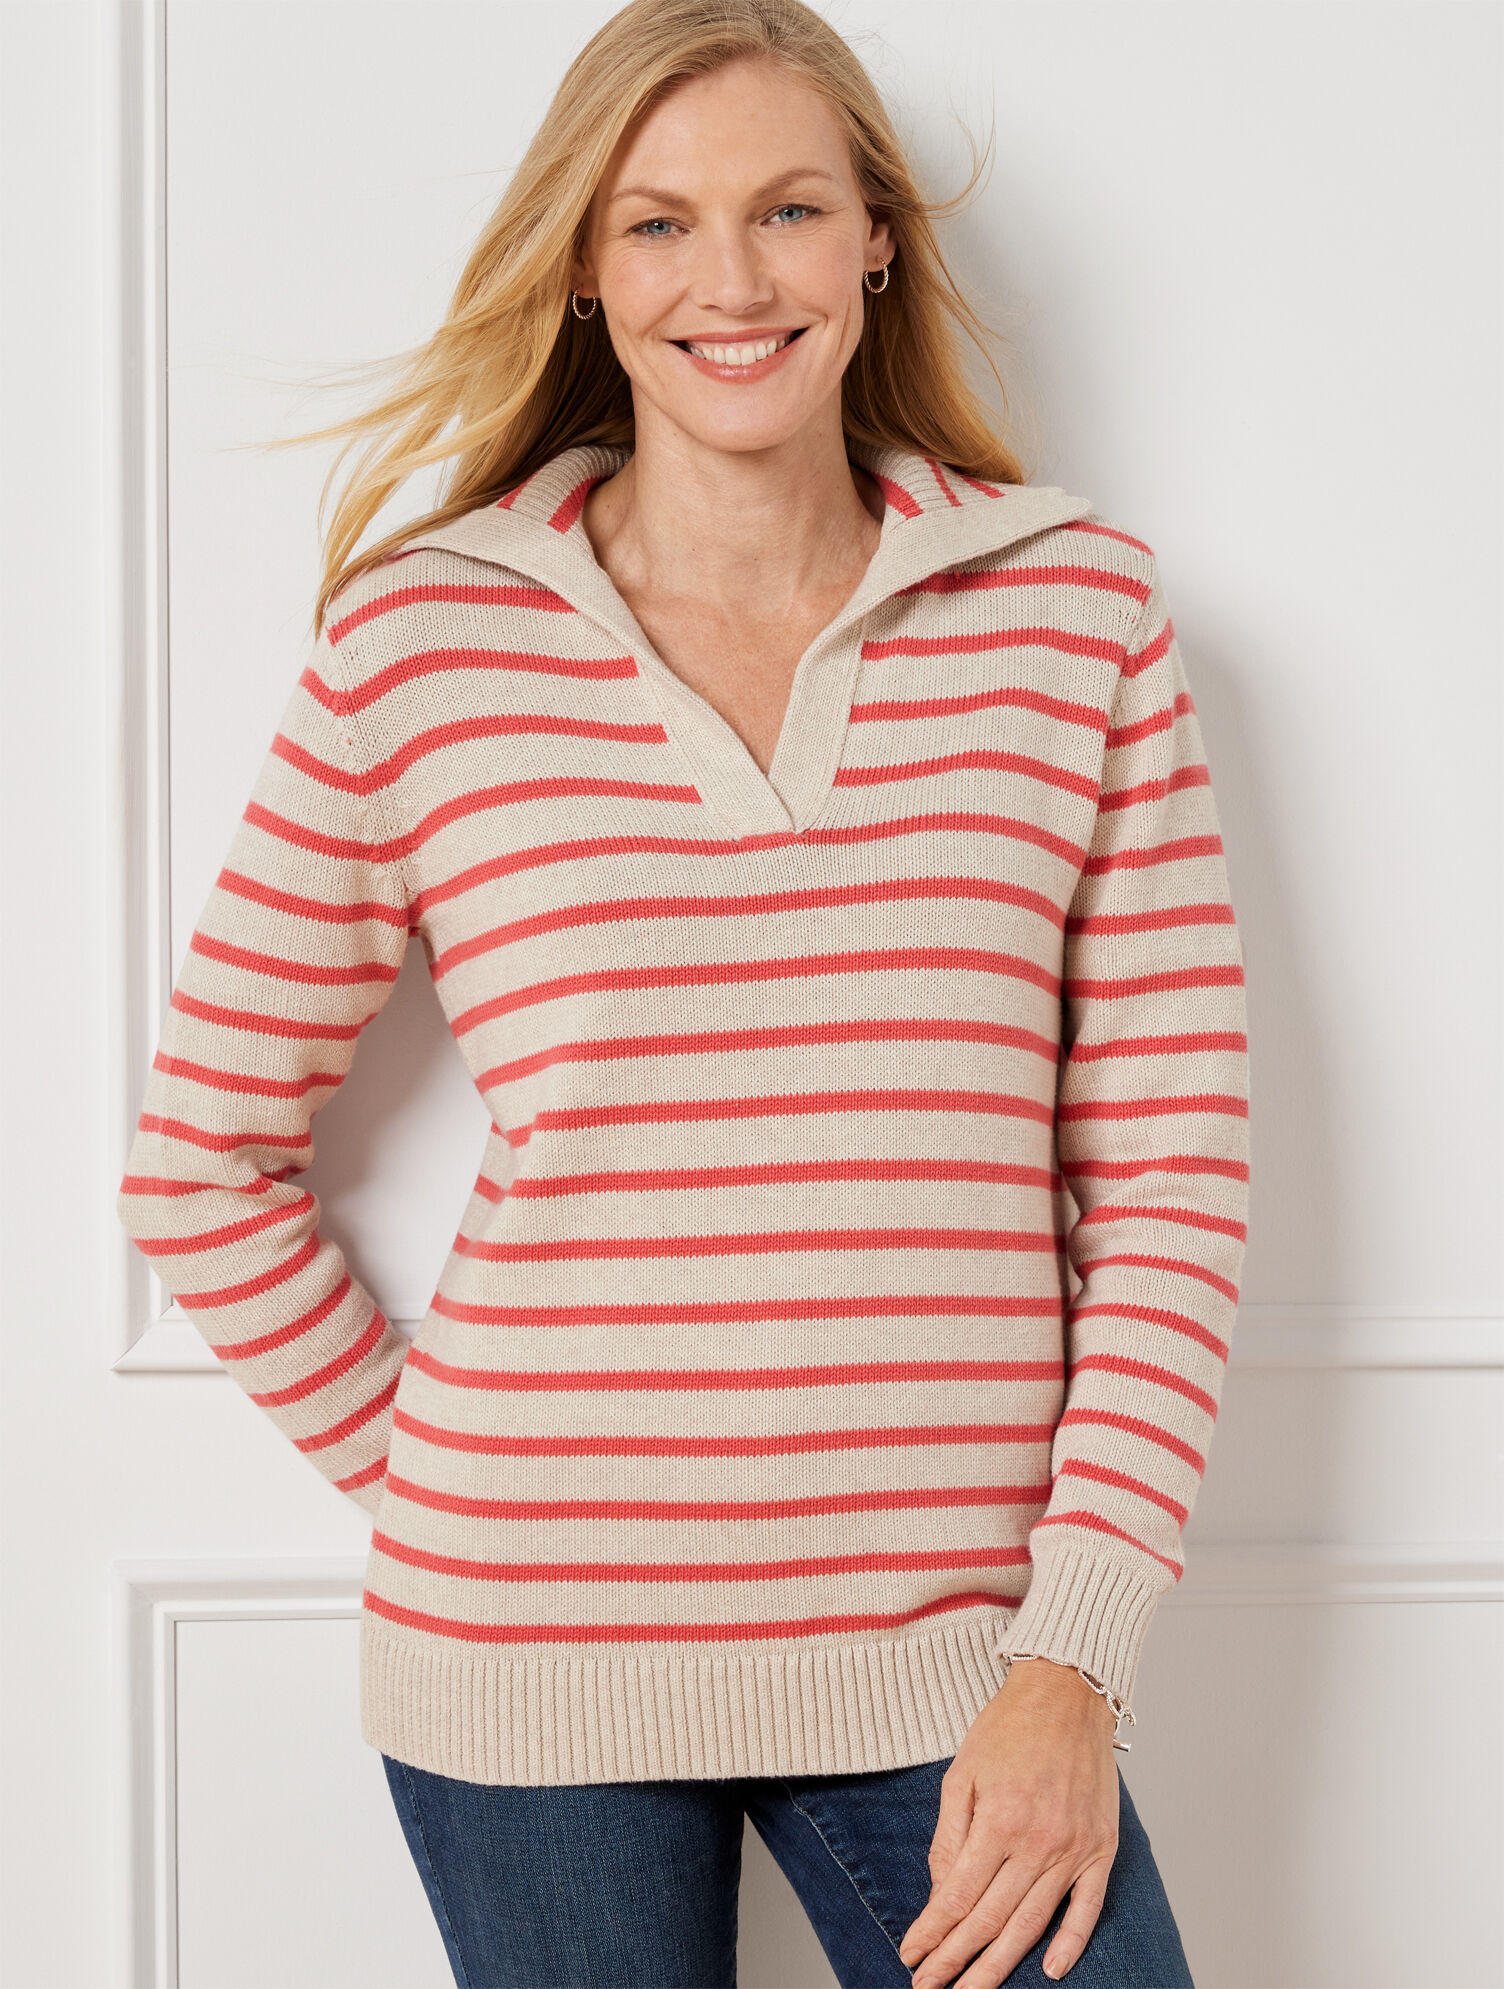 Plus Size - Brushed Cotton Johnny Collar Pullover Sweater - Simple Stripe - Oatmeal Heather/Terracotta - 1x Talbots